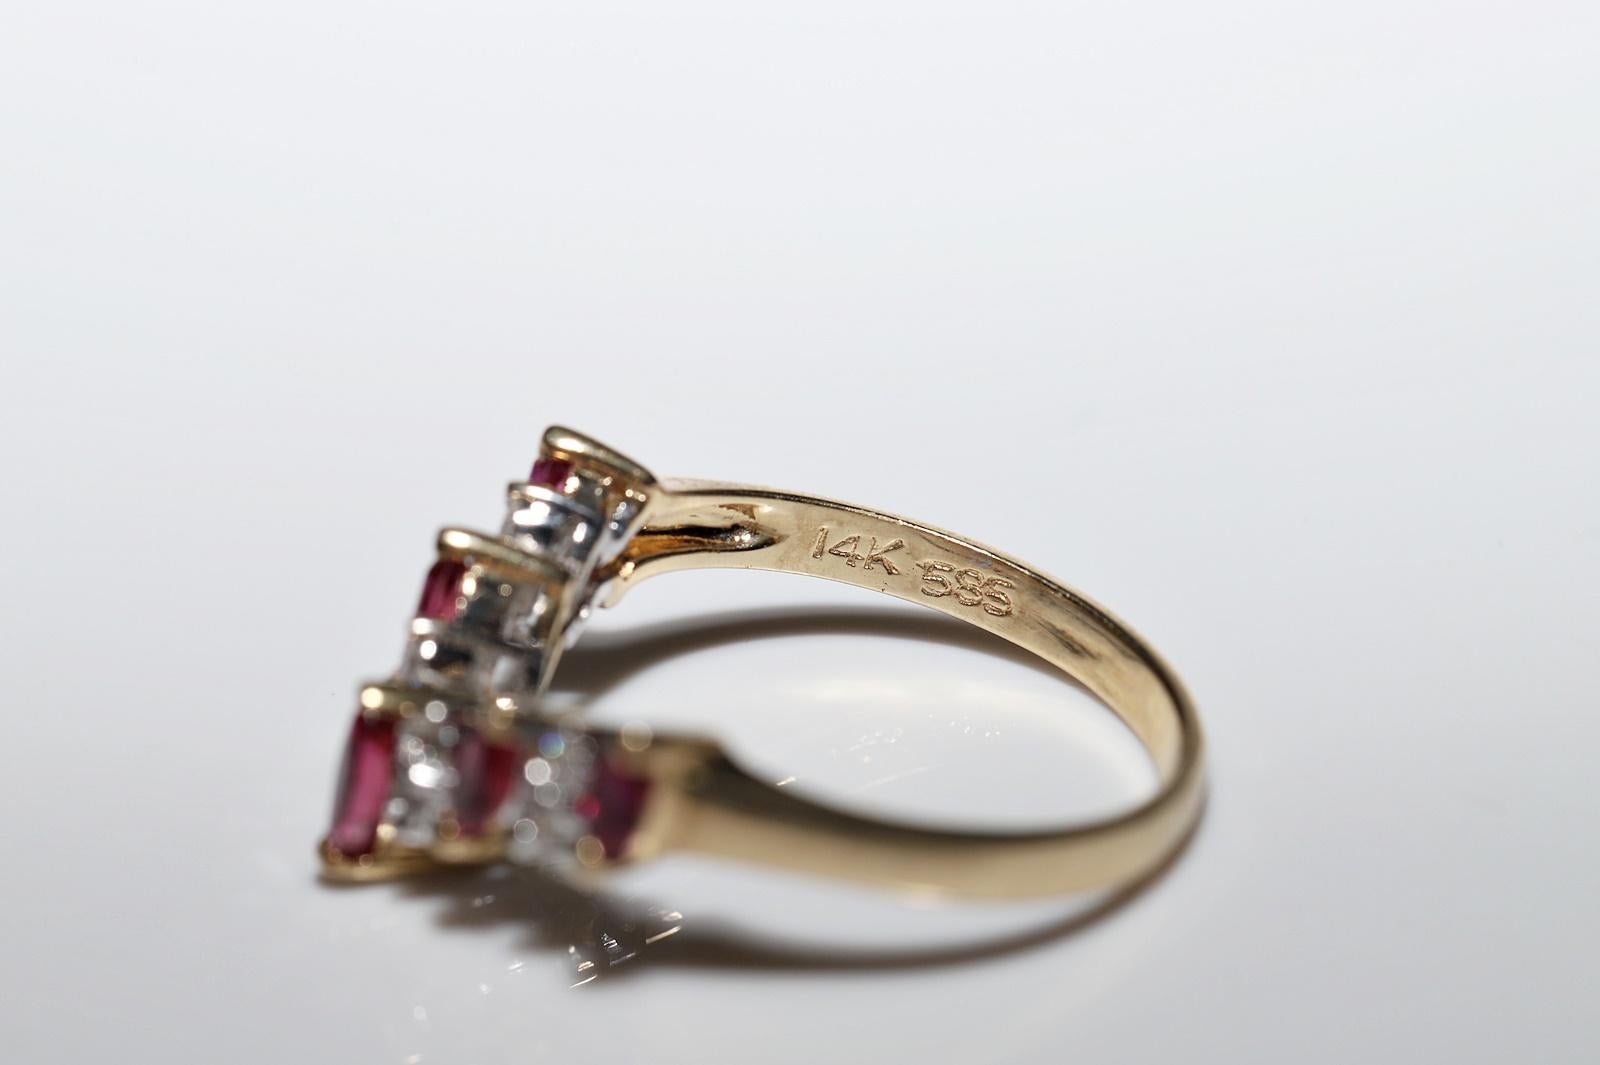  Vintage Circa 1990s 14k Gold Natural Diamond And Ruby Decorated Ring  For Sale 7